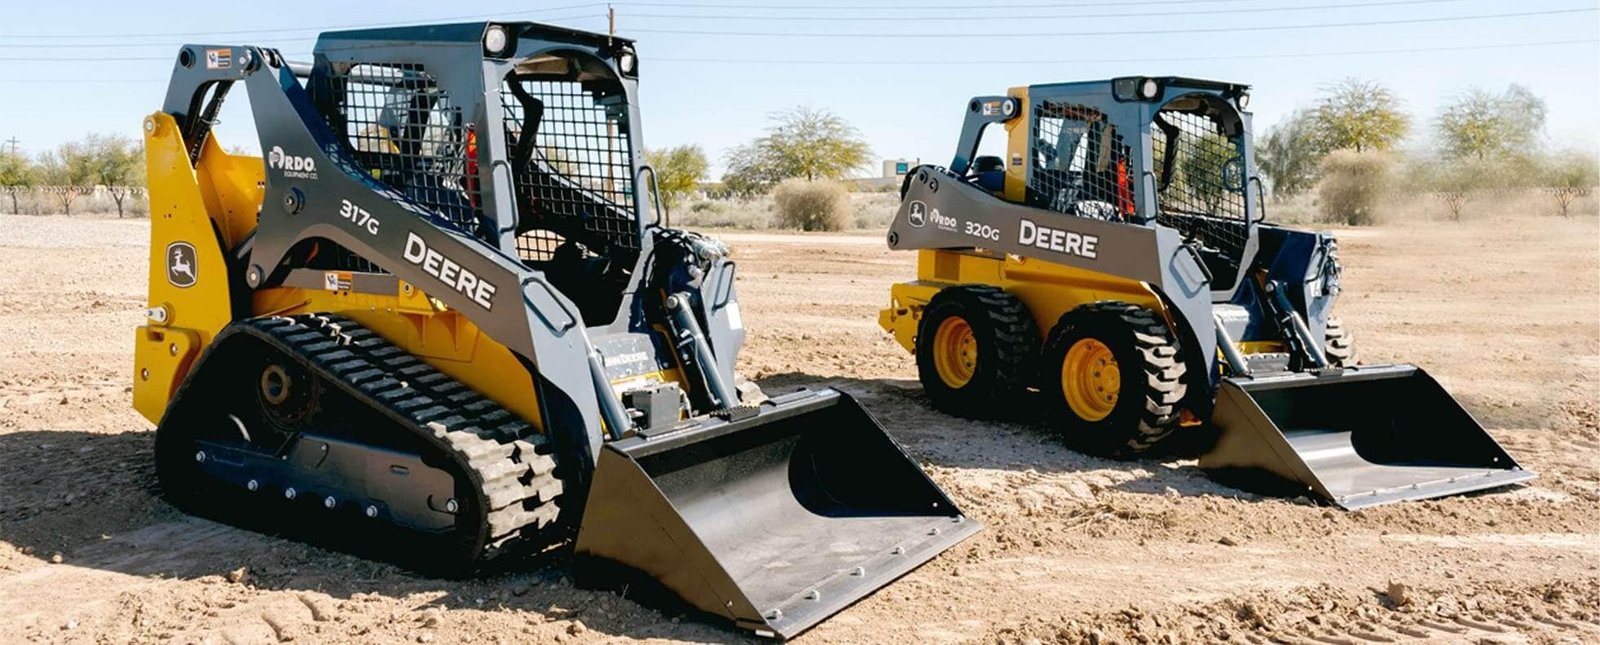 Photograph of a skid steer loaders